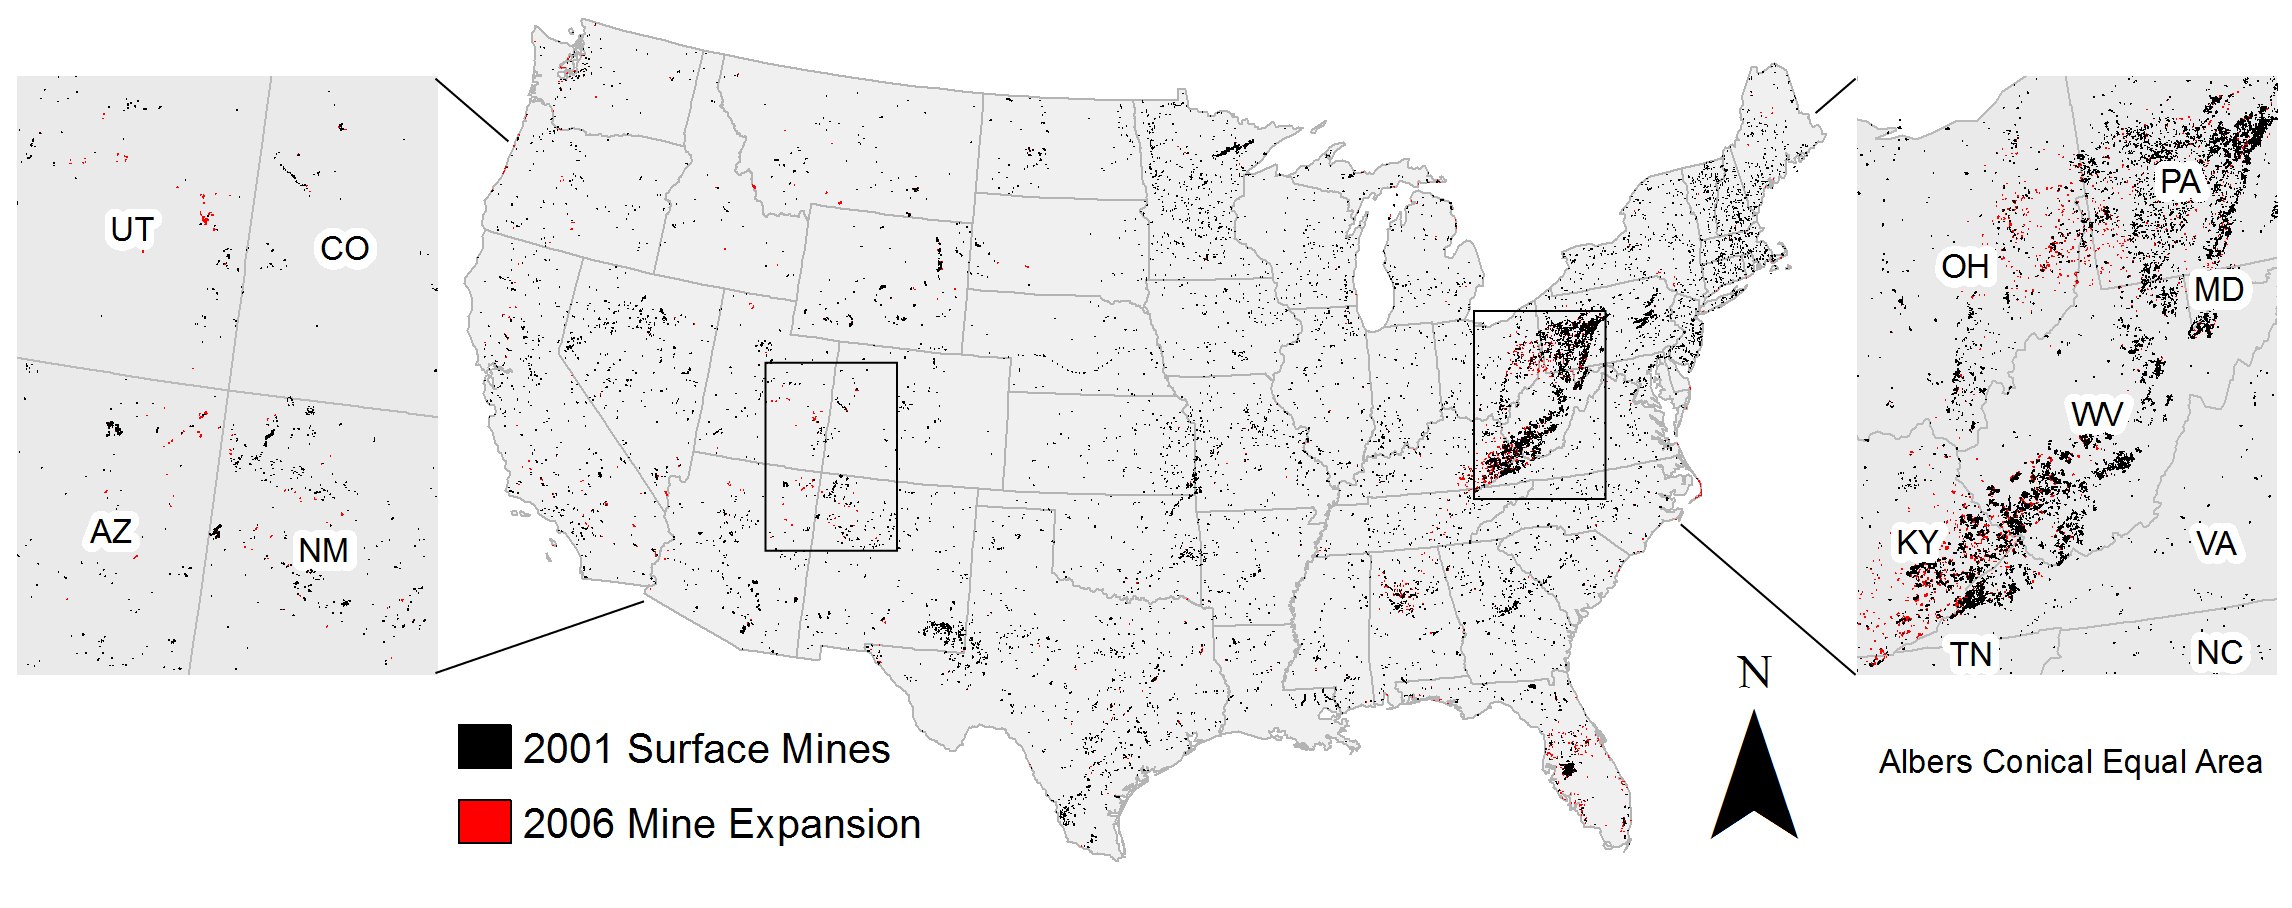 The 2001 and 2006 mines mapped within the conterminous United States.